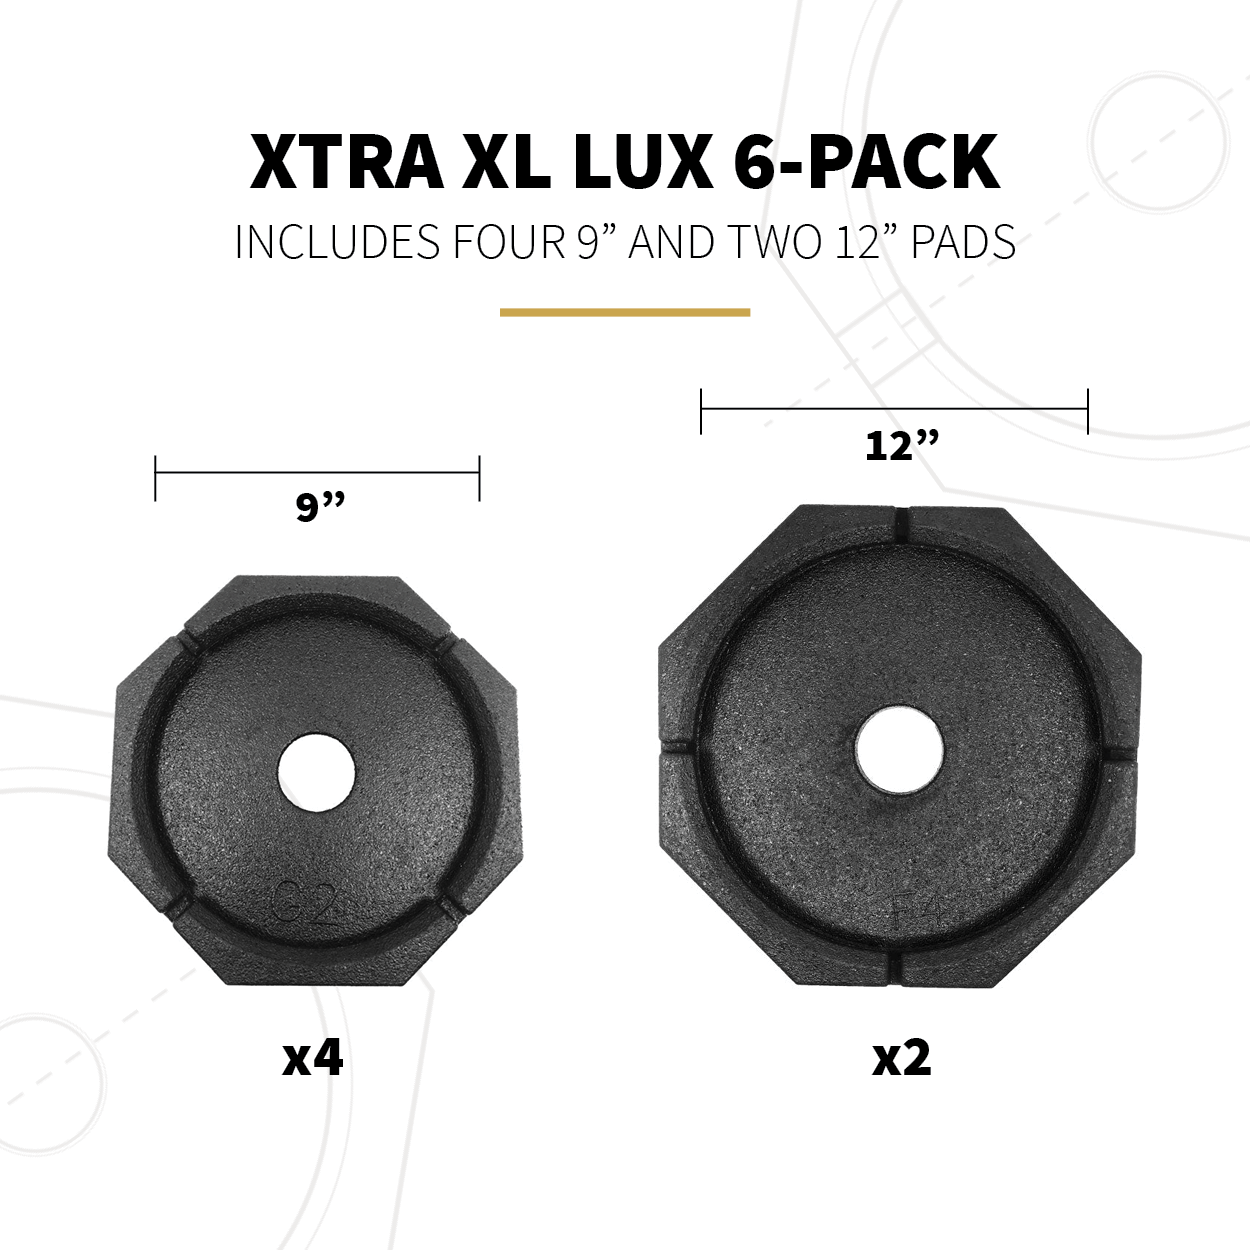 XTRA XL Lux 6-Pack Specs